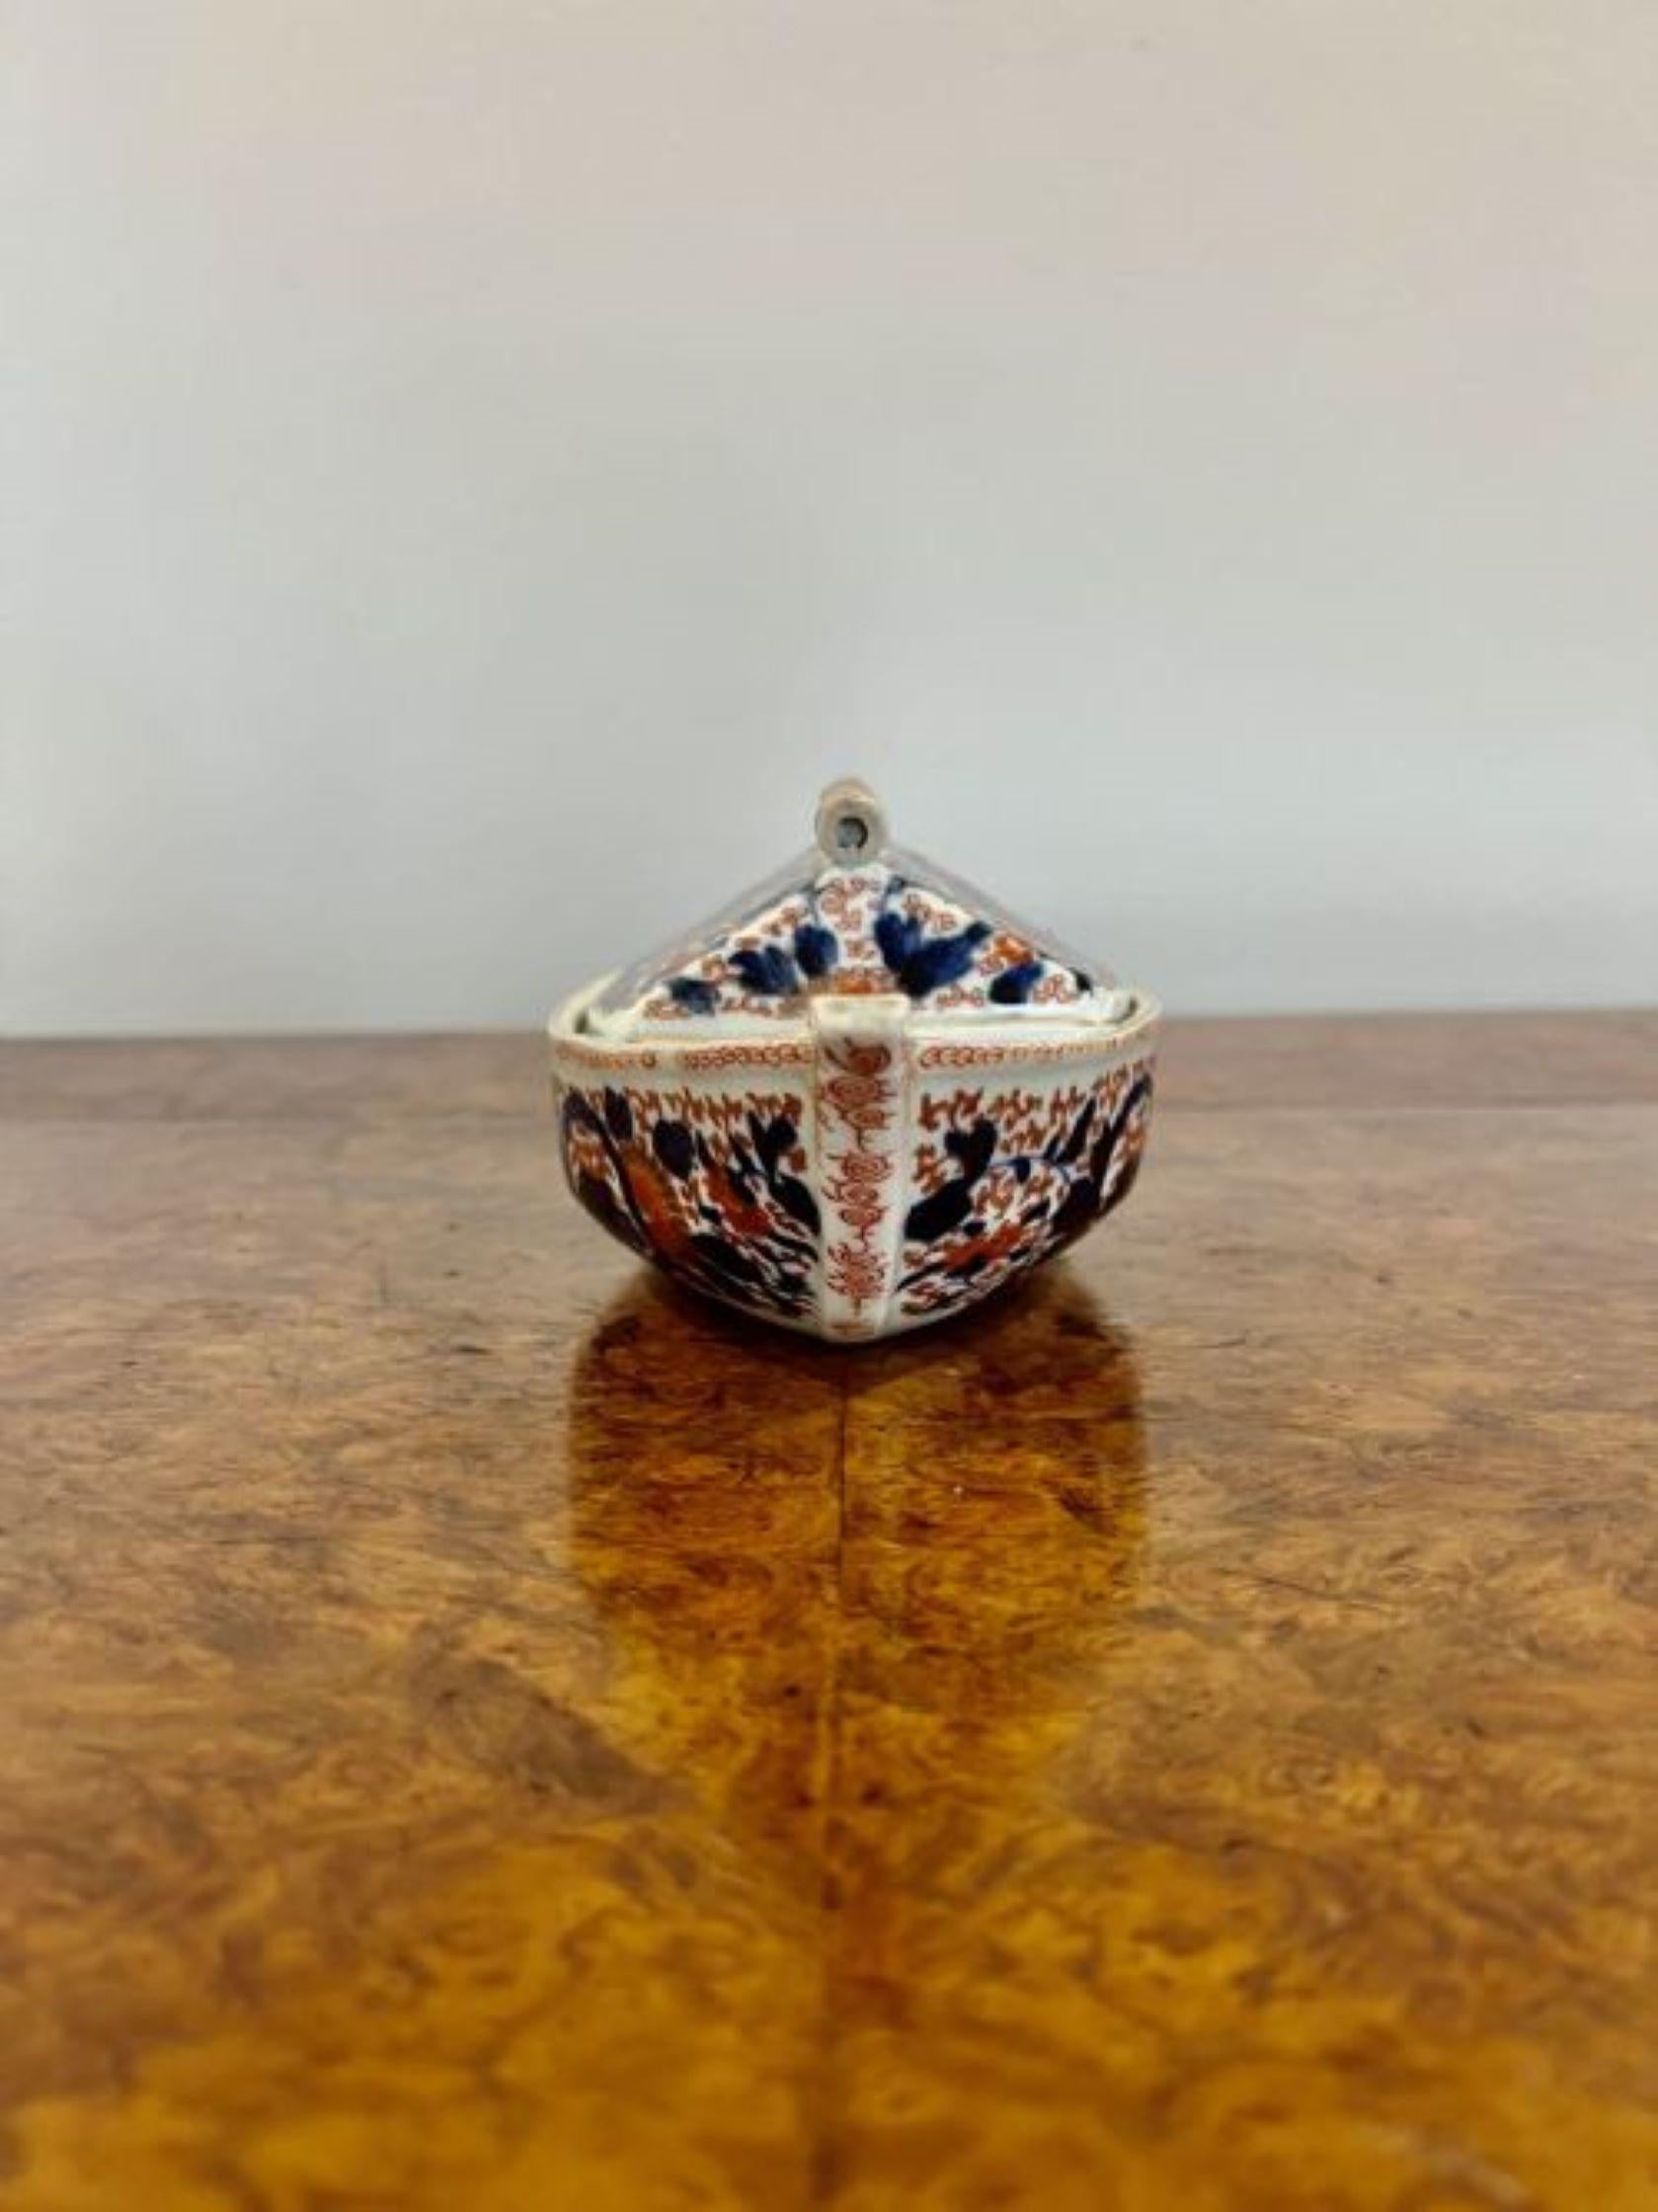 Unusual antique Japanese imari quality boat shaped dish having an unusual antique Japanese imari boat shaped dish with a removable lid revealing a storage compartment, decorated with flowers, leaves and scrolls in wonderful hand pained red, blue,